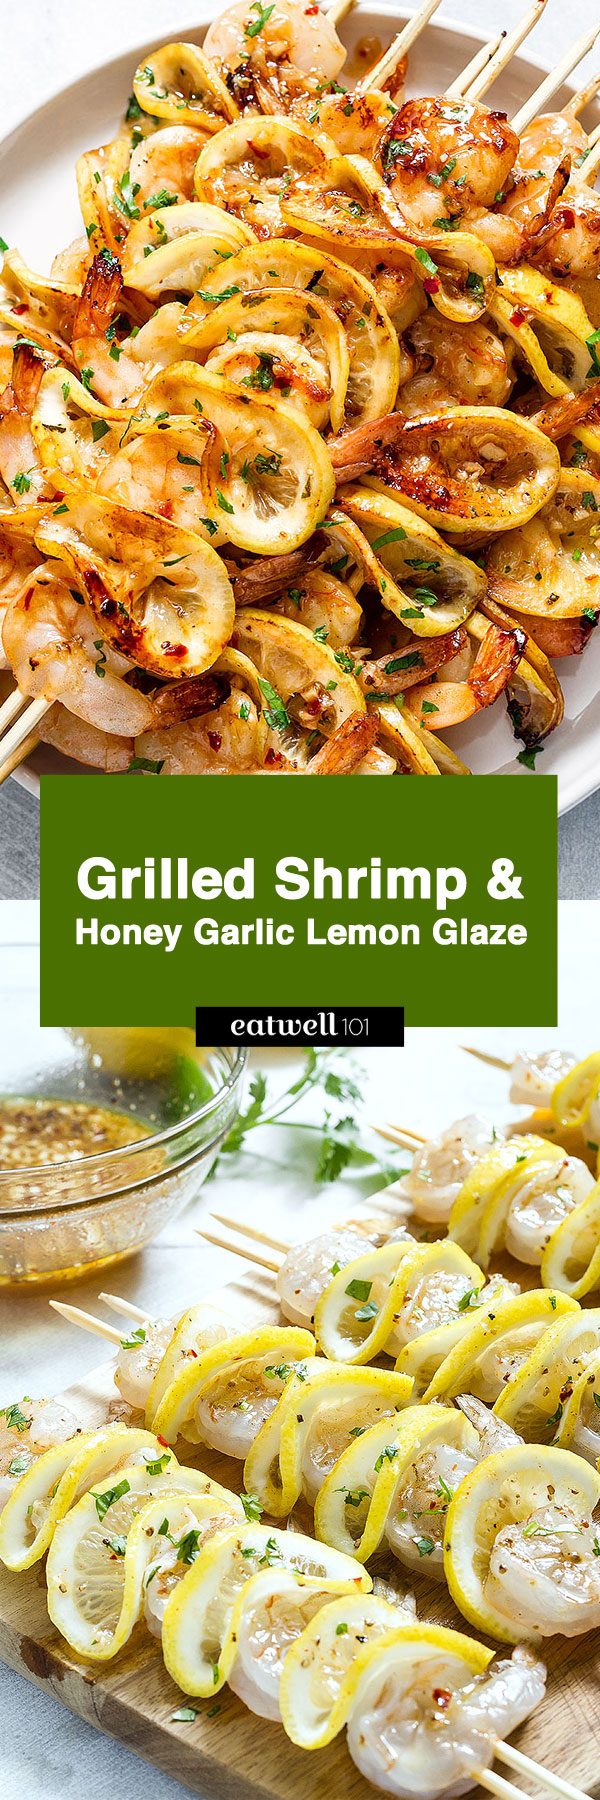 Lemon Grilled  Shrimp with Honey Garlic Glaze - #shrimp #recipe #eatwell101 - These easy grilled lemon shrimp skewers can be on your table in just 20 minutes. Incredibly flavorful!